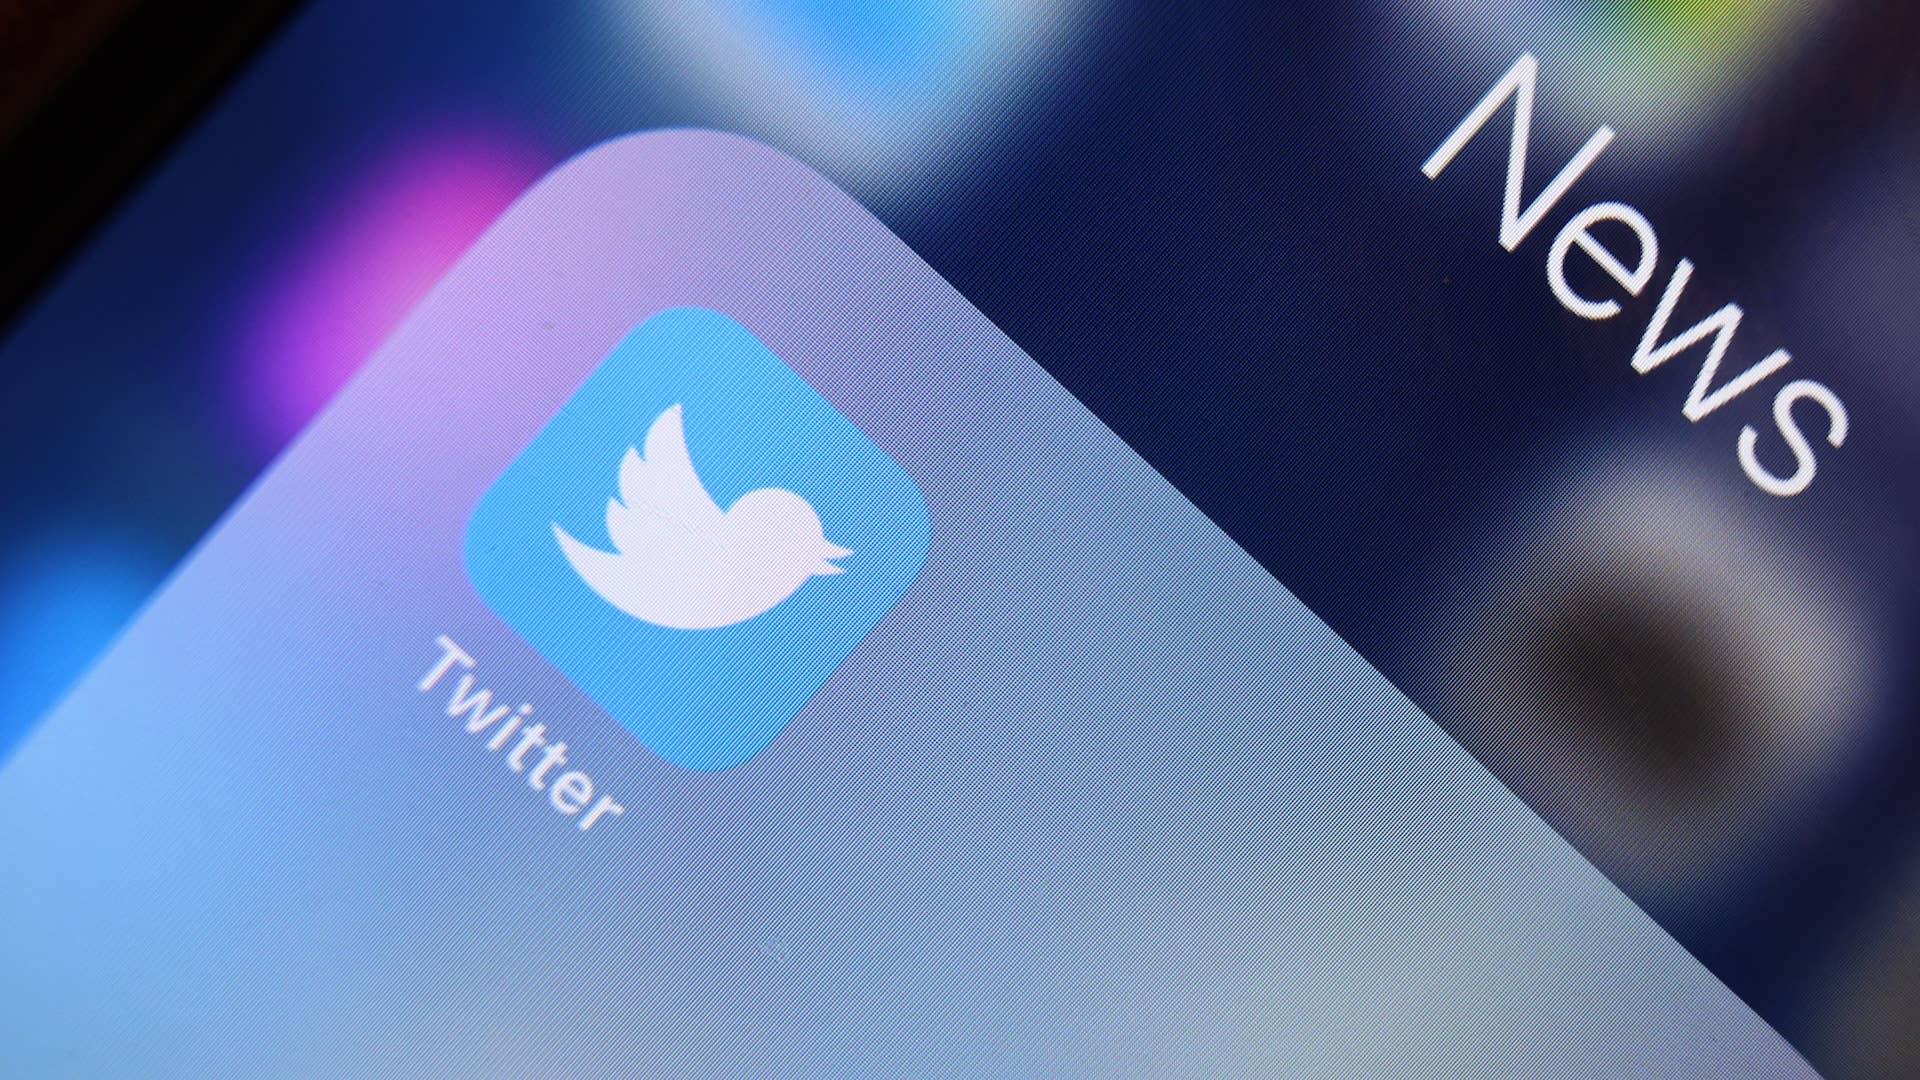 The logo of news platform Twitter is seen on the display of an iPhone.